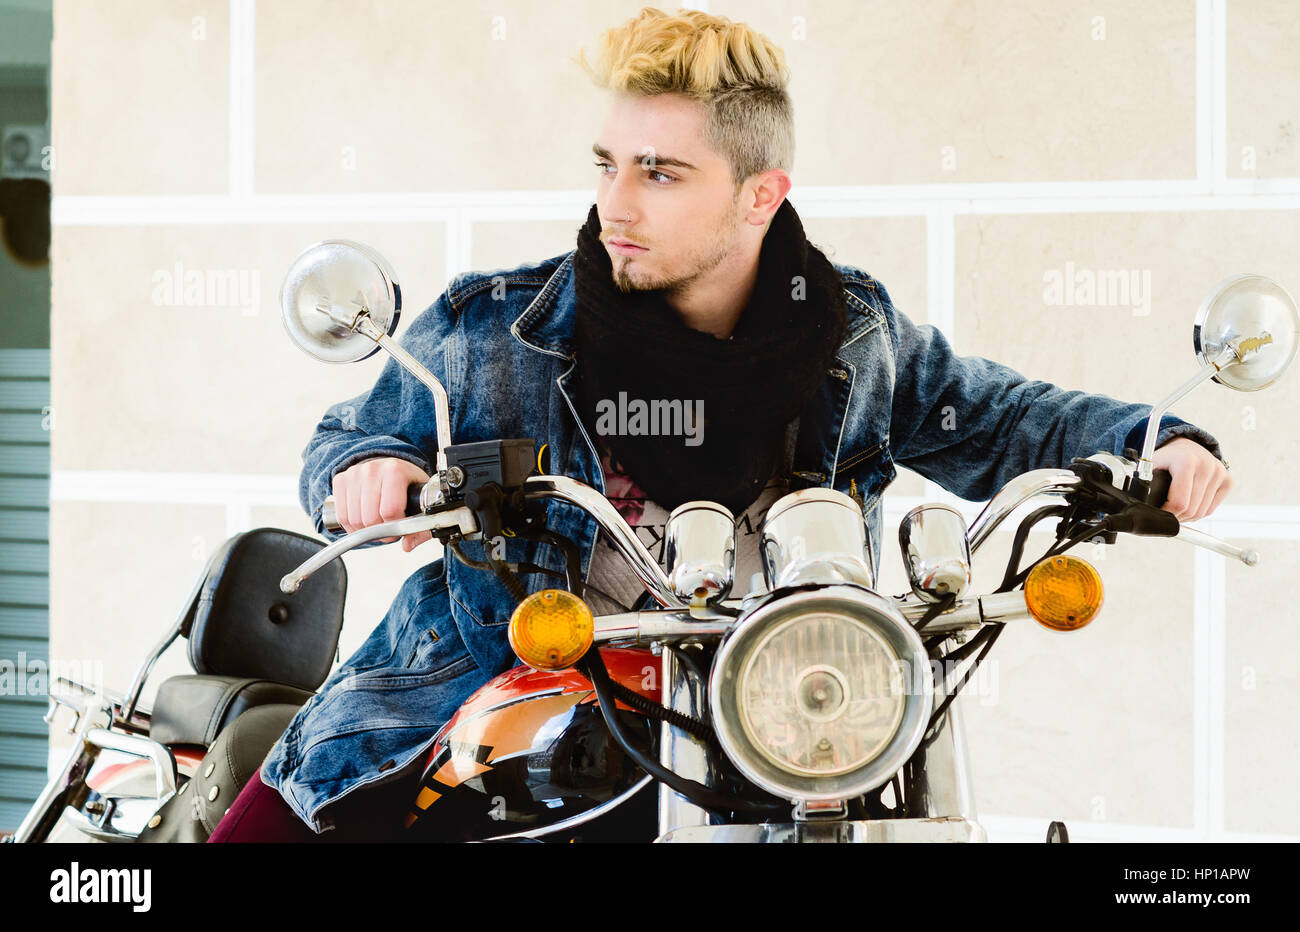 Handsome fashion man sitting on classical motorcycle. Stock Photo